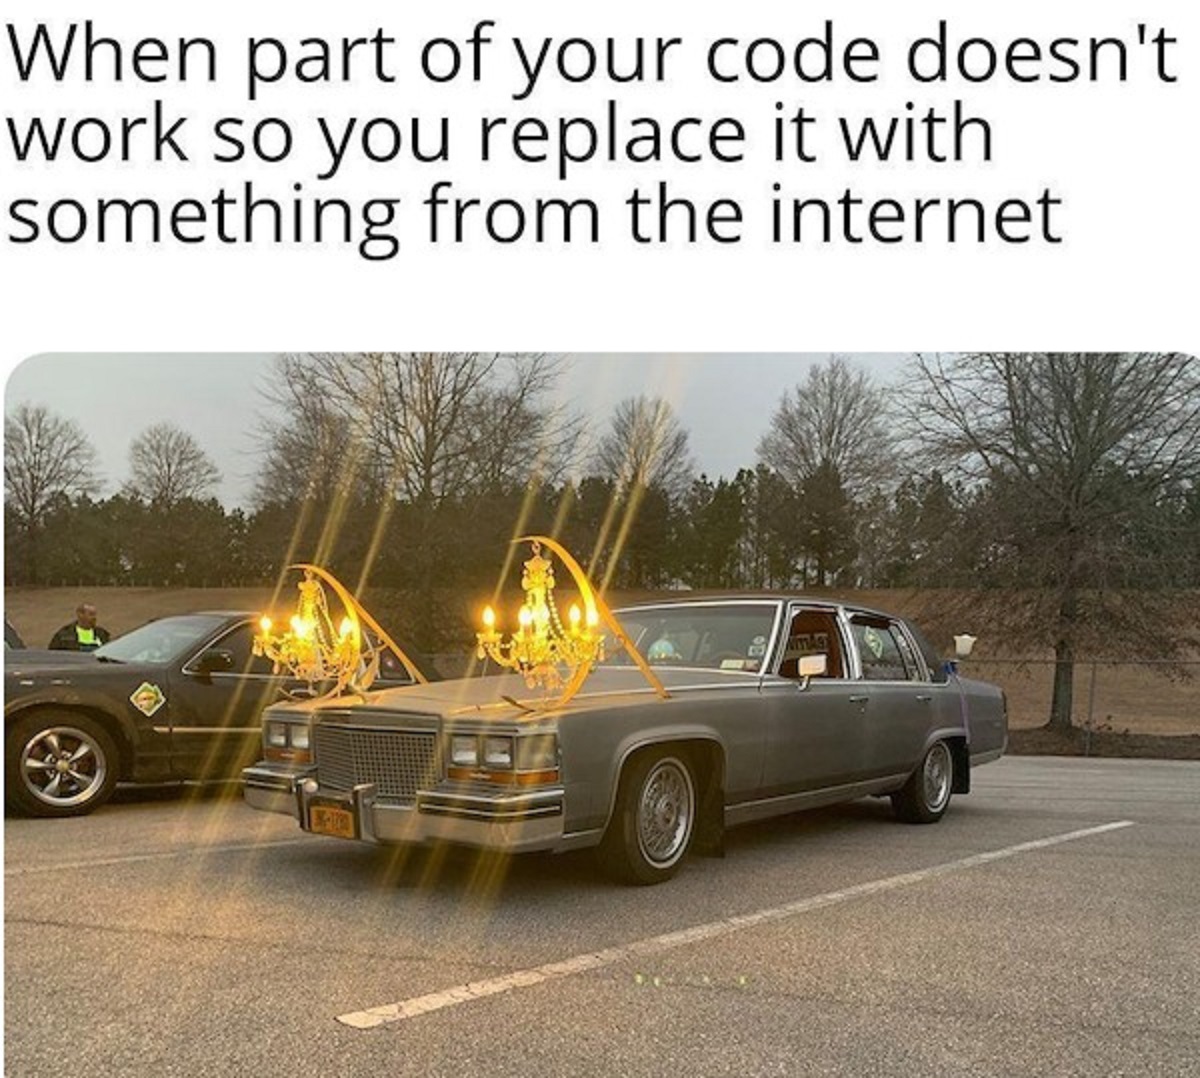 car with chandelier meme - When part of your code doesn't work so you replace it with something from the internet